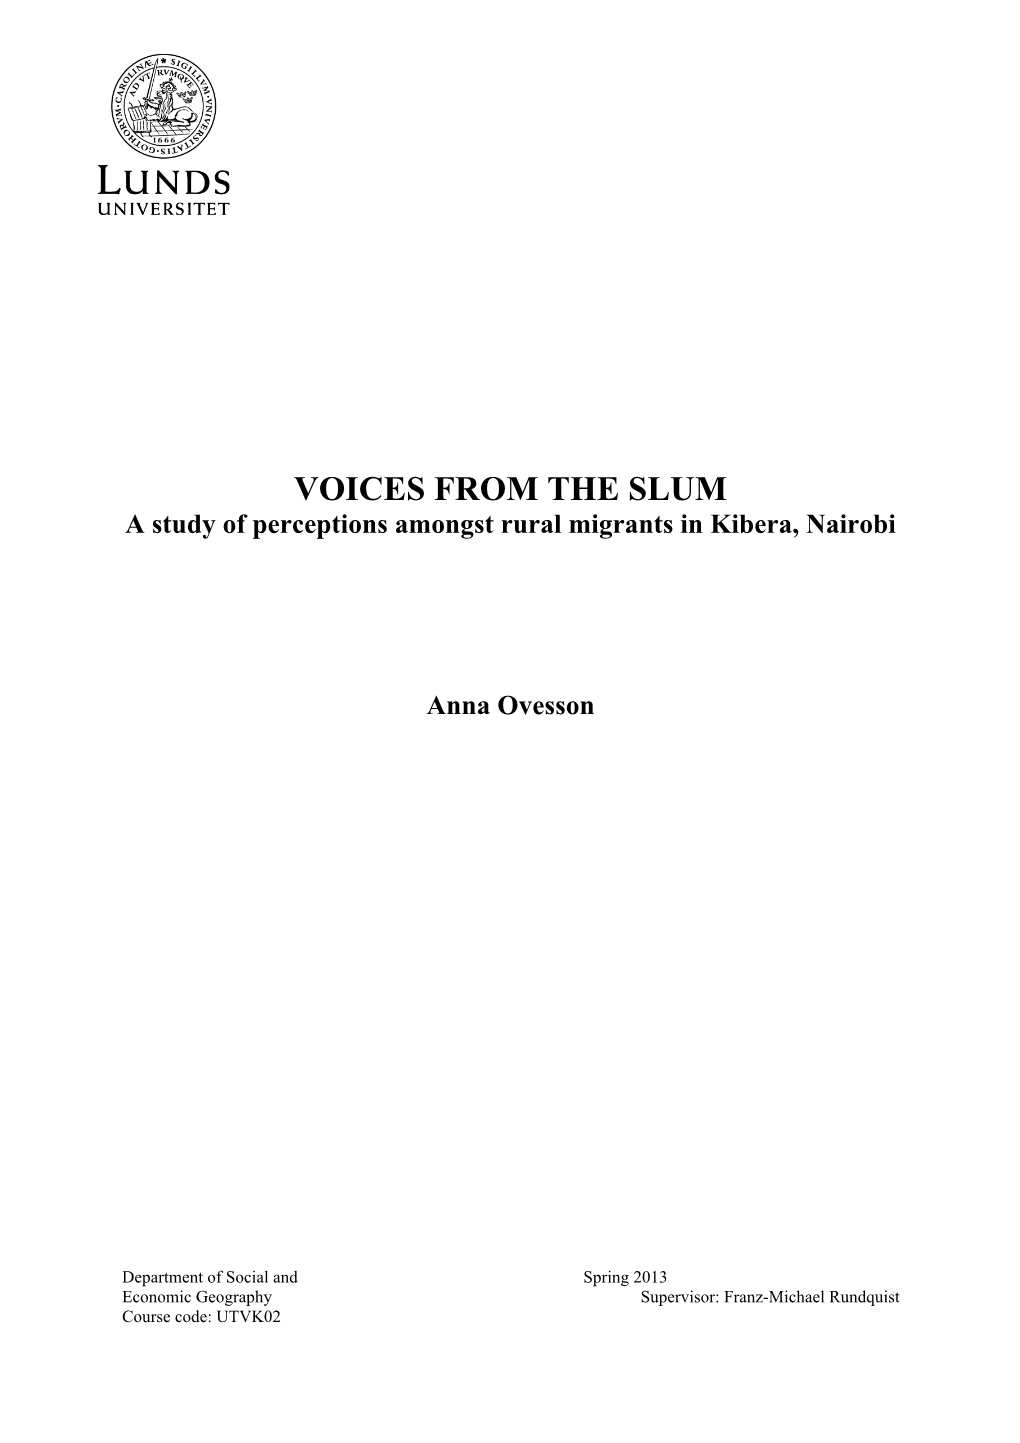 VOICES from the SLUM a Study of Perceptions Amongst Rural Migrants in Kibera, Nairobi